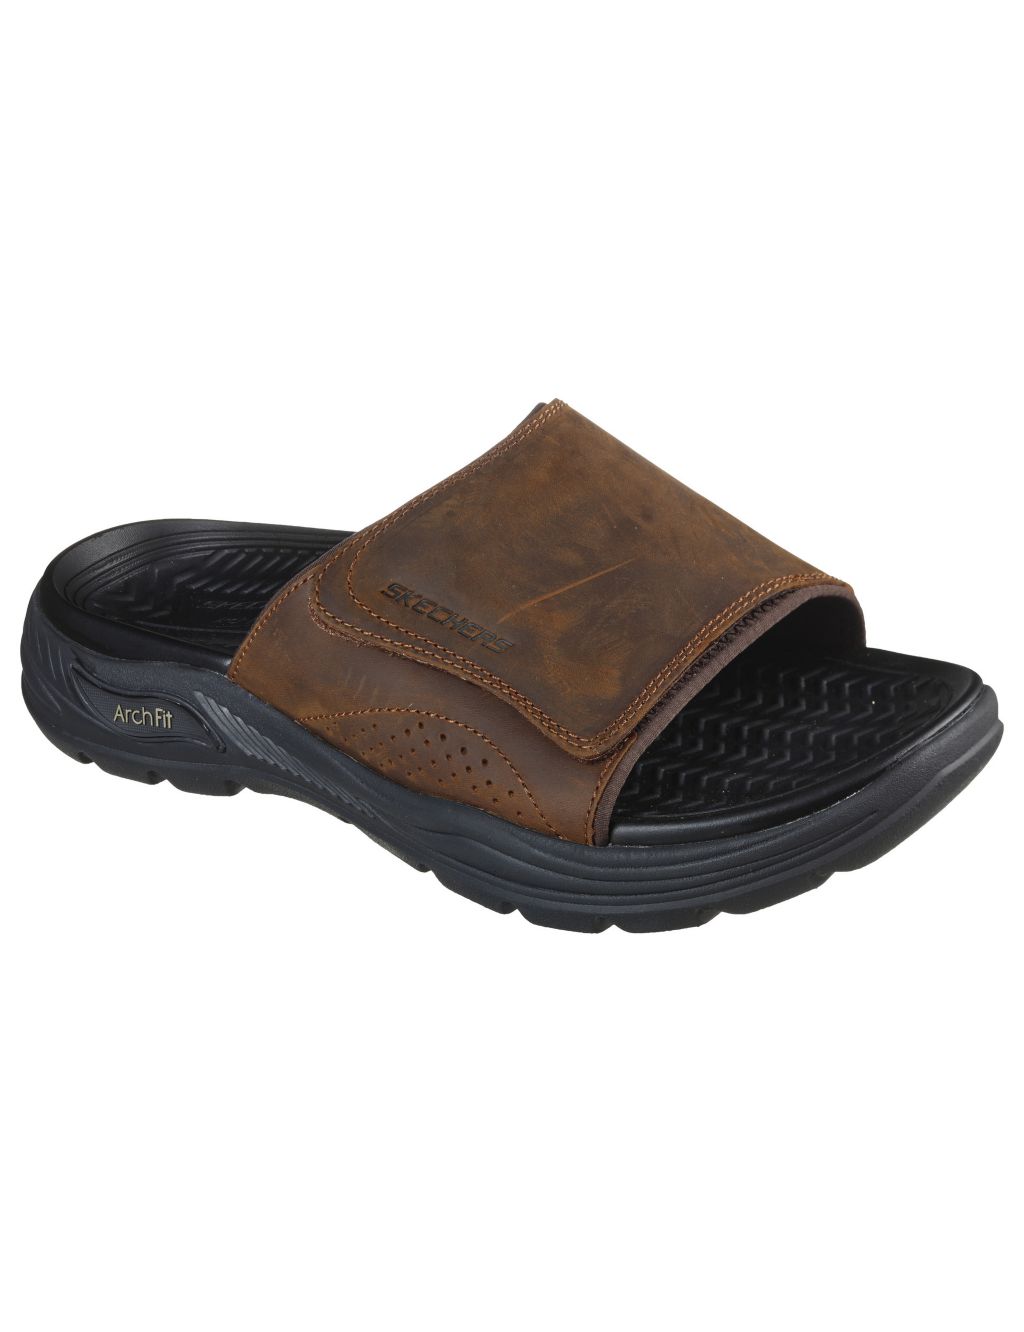 Arch Fit Motley Revelo Leather Sliders image 2